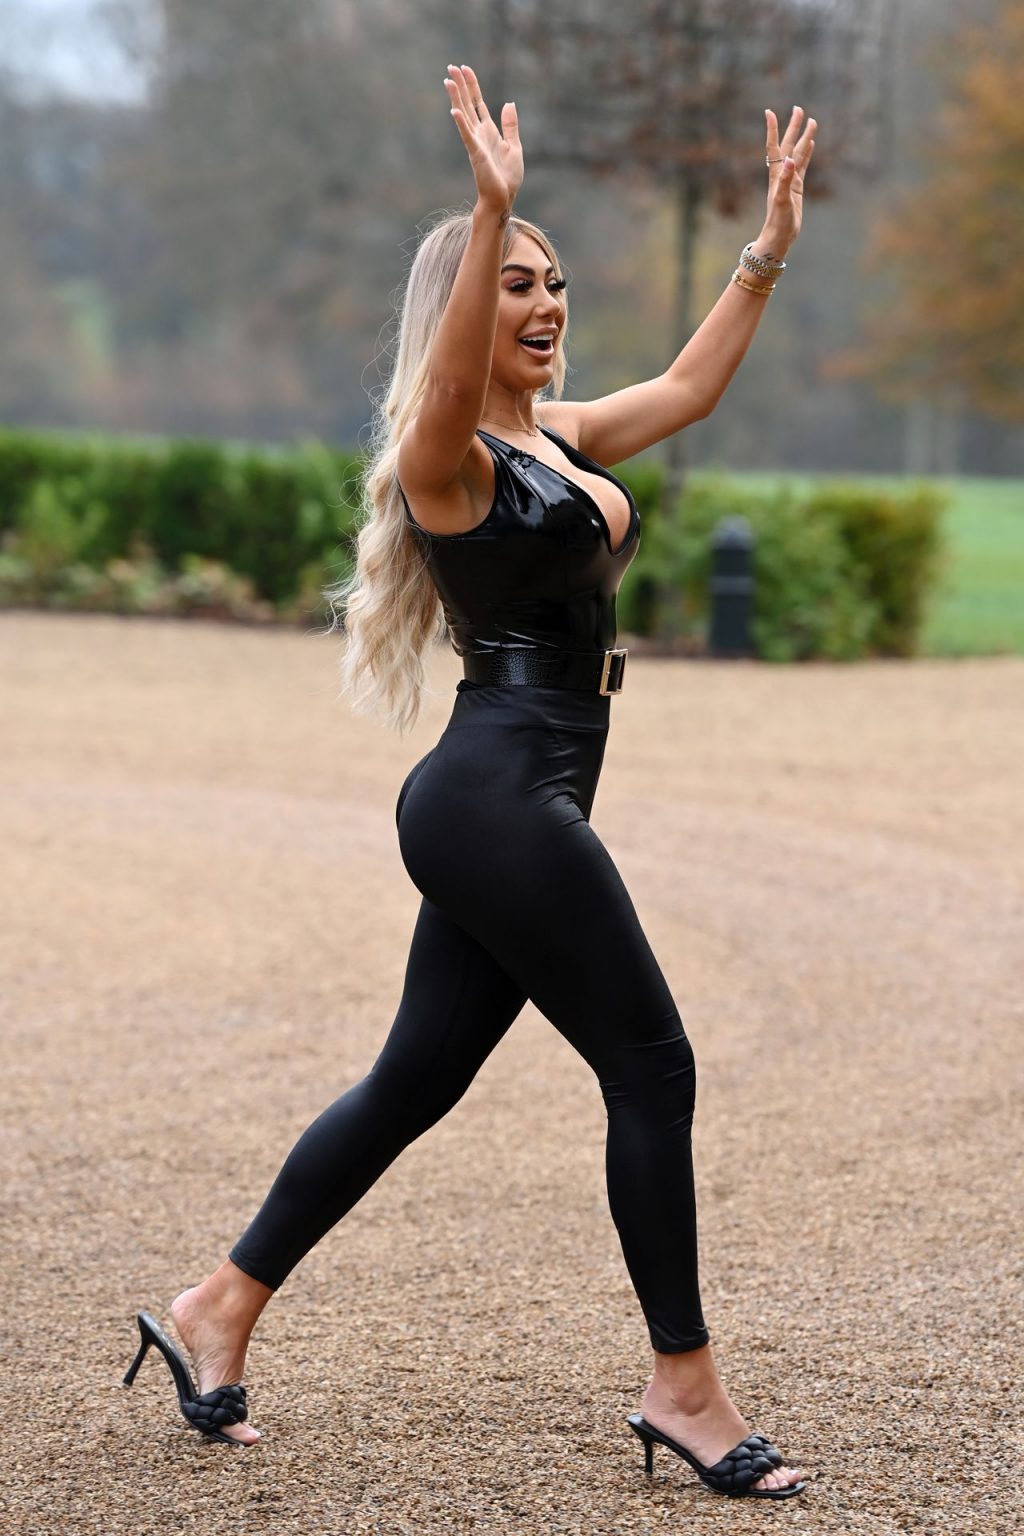 Chloe Ferry Shows Off Her Boobs in Sussex (30 Photos)